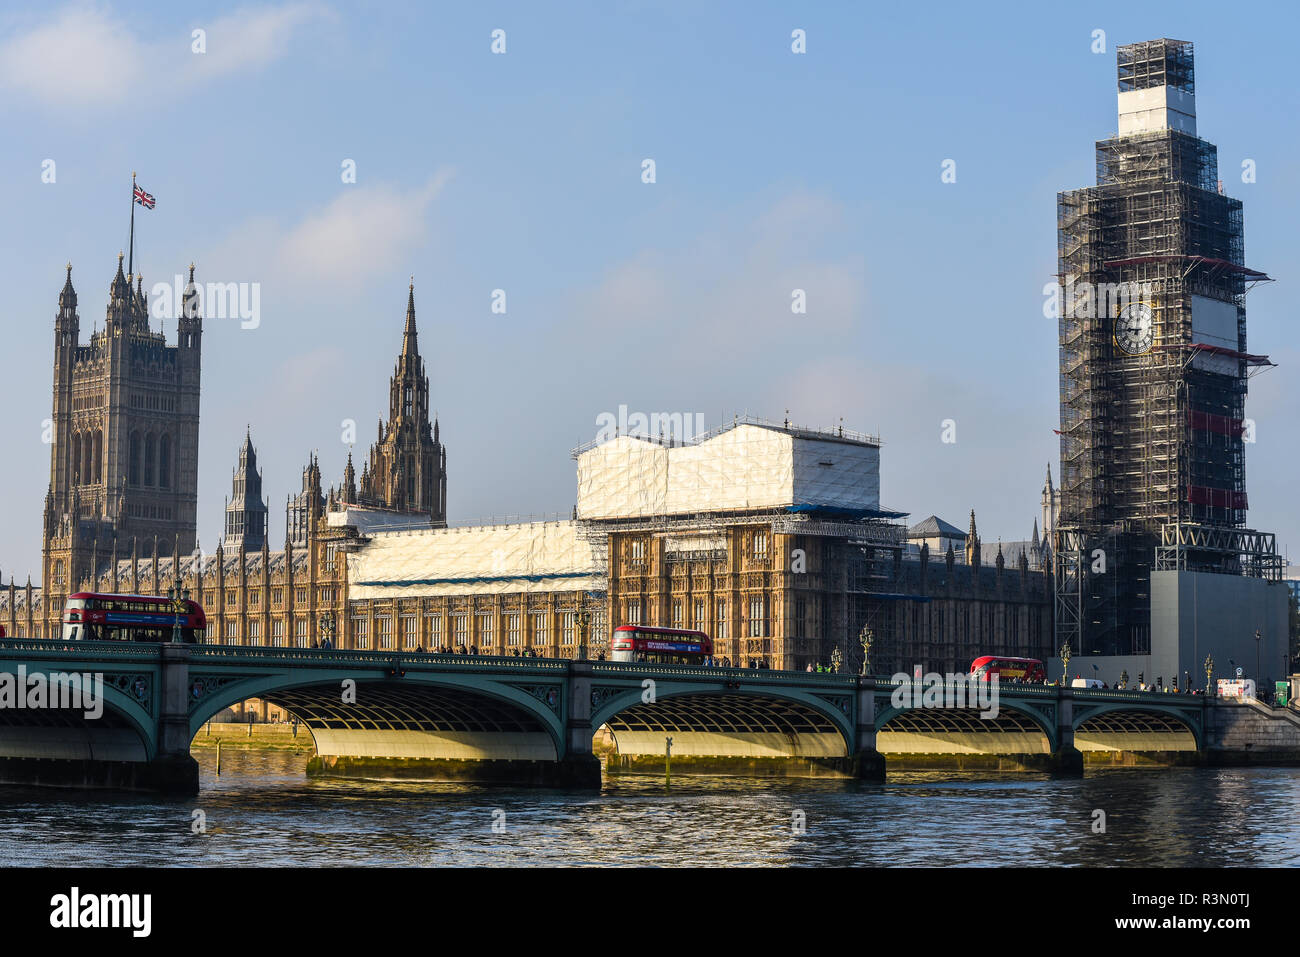 Houses of Parliament, Palace of Westminster, London, shrouded in sheeting and a framework of scaffolding during restoration repairs. Listed building Stock Photo